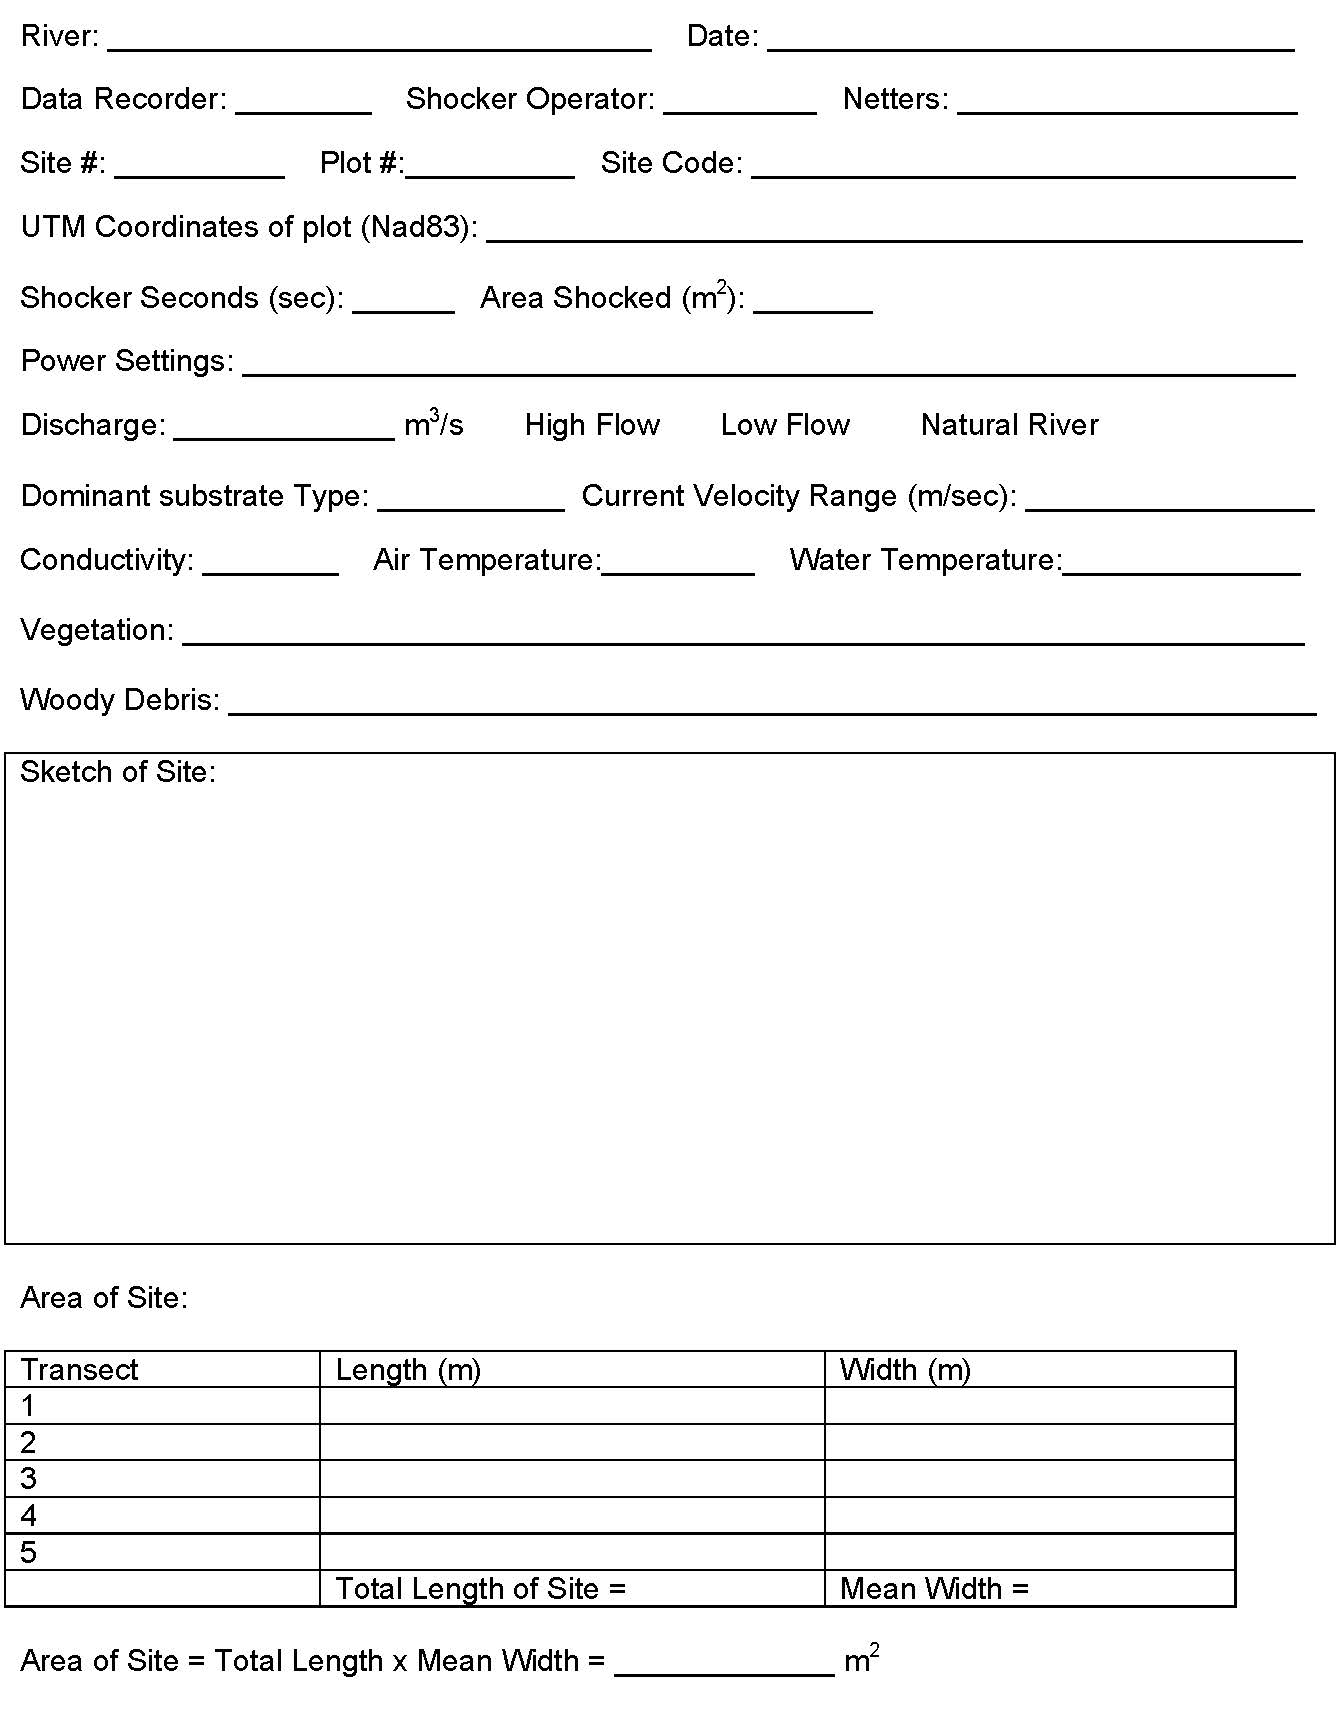 a sample form for collecting information about electrofishing